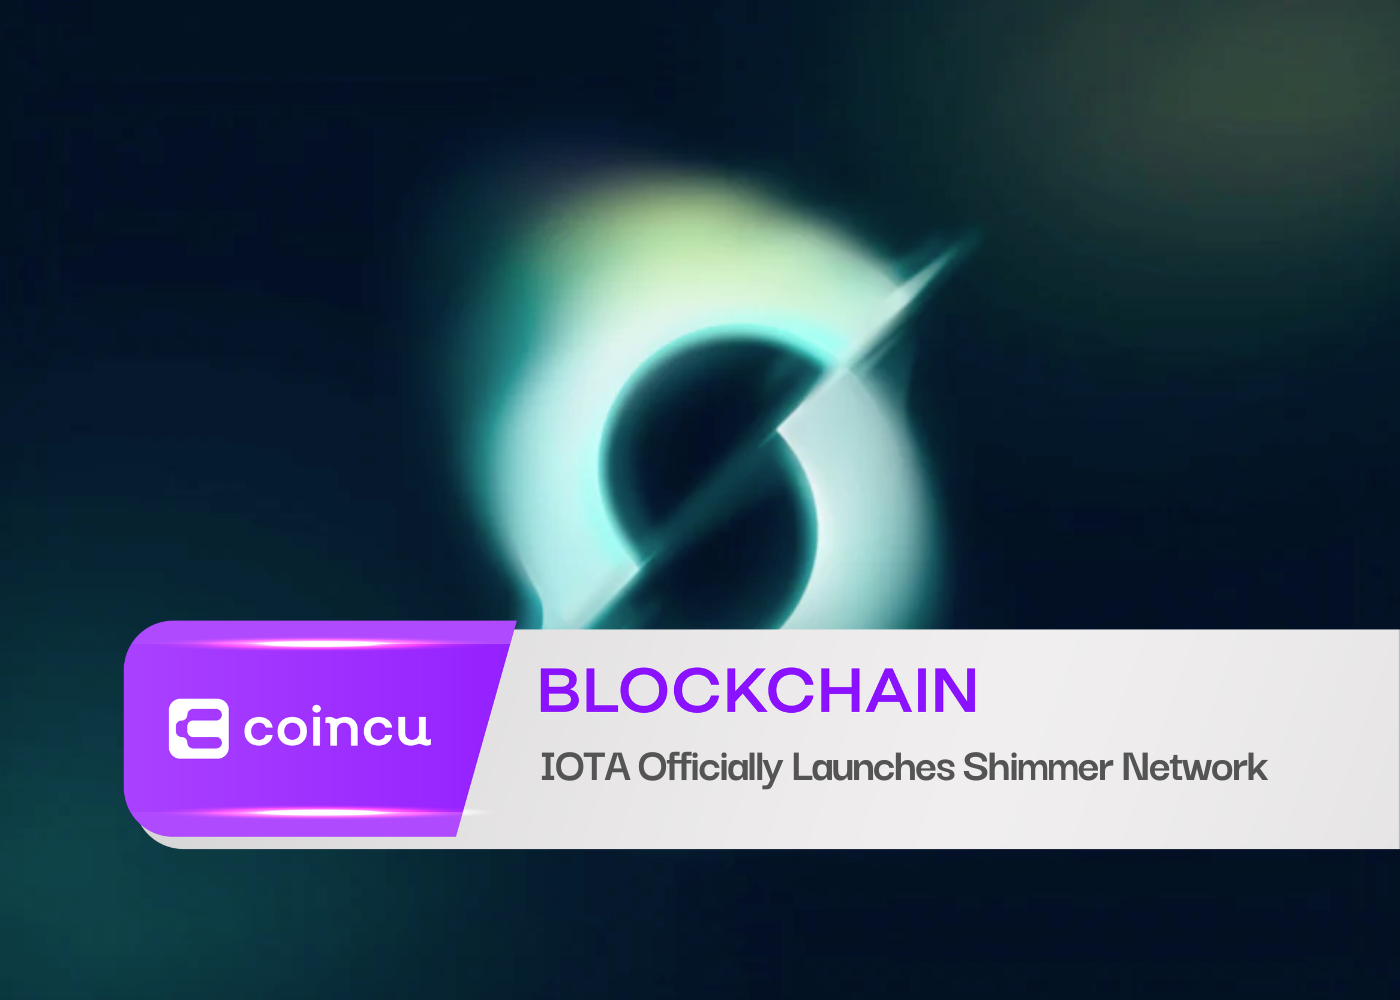 IOTA Officially Launches Shimmer Network